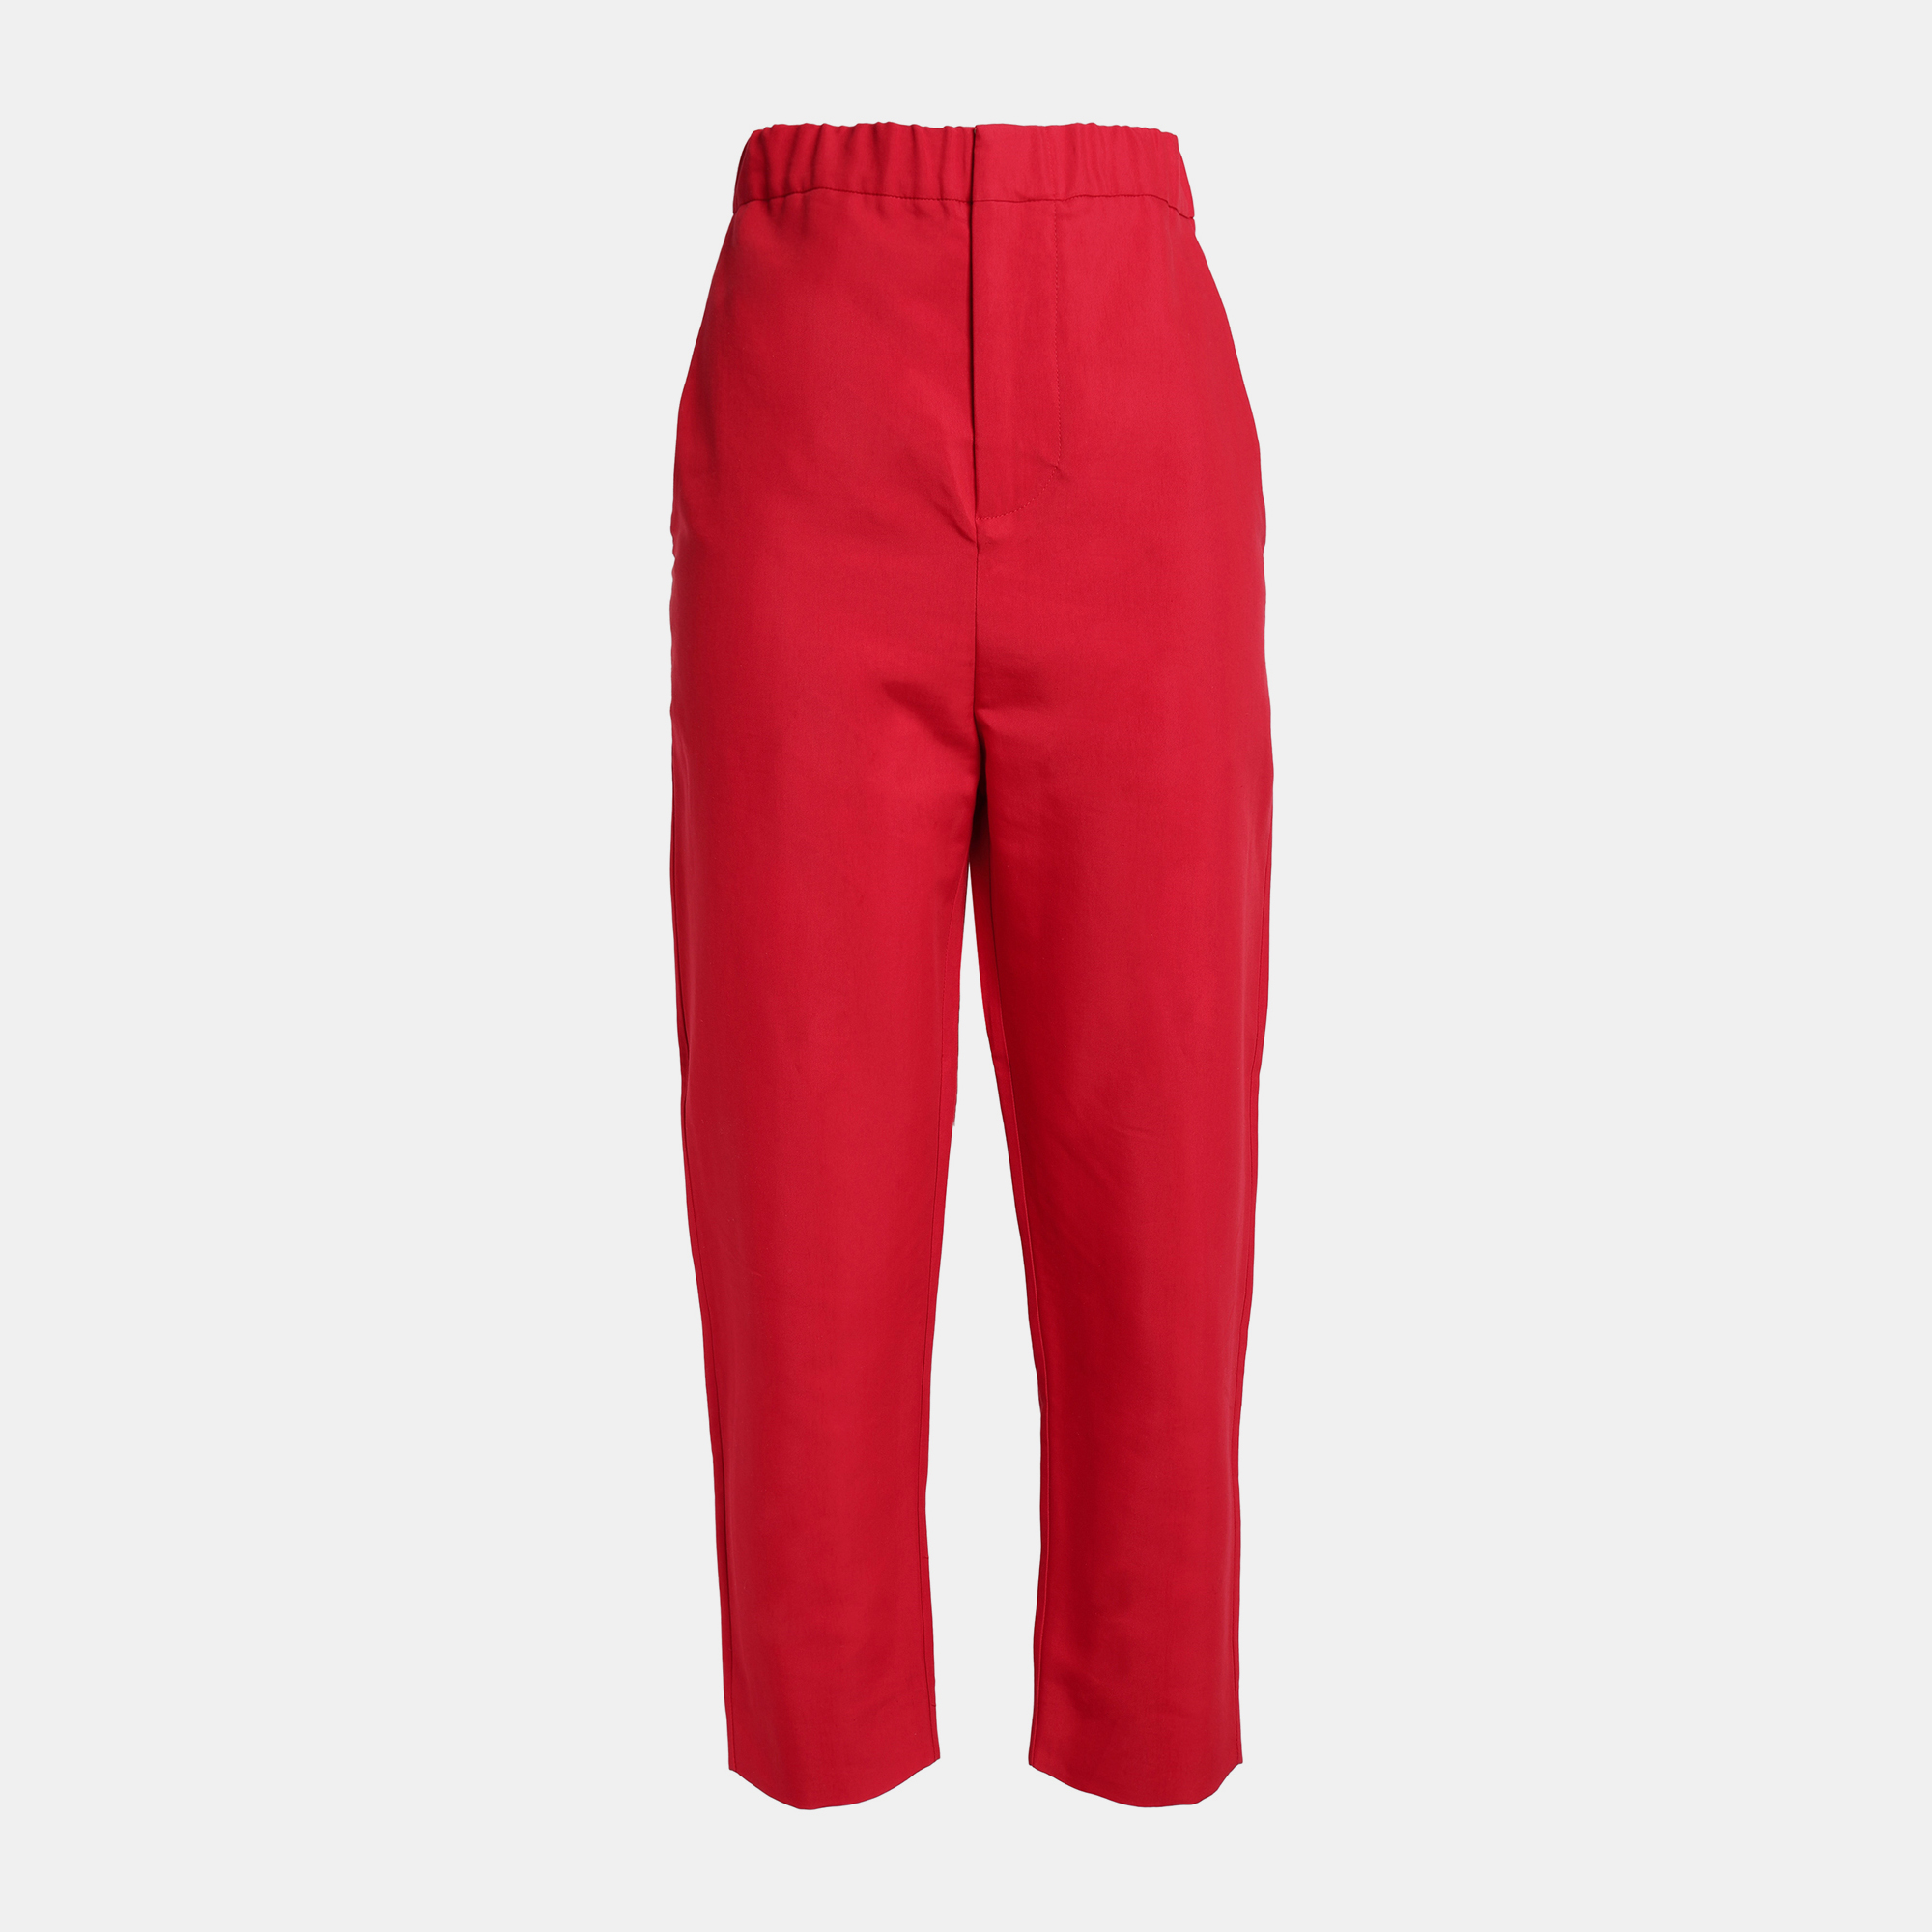 

Marni Red Cotton Blend Tapered Pants  (IT 38